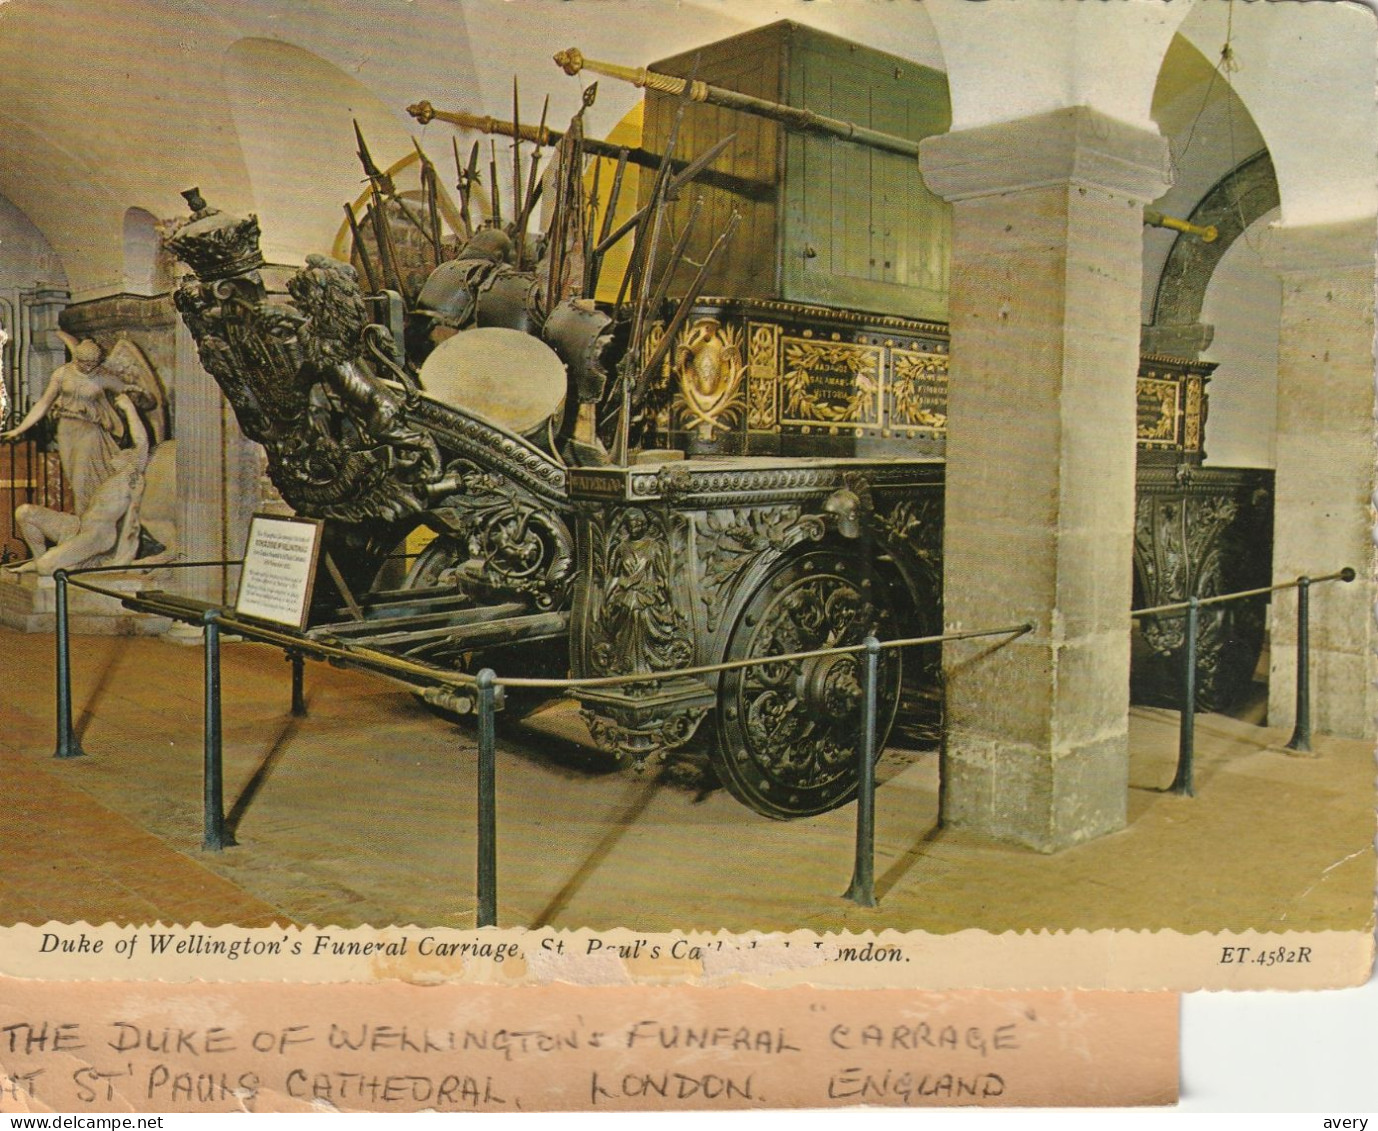 Duke Of Wellington's Funeral Carriage, St. Paul's Cathefral, London Note Taped On Back - St. Paul's Cathedral